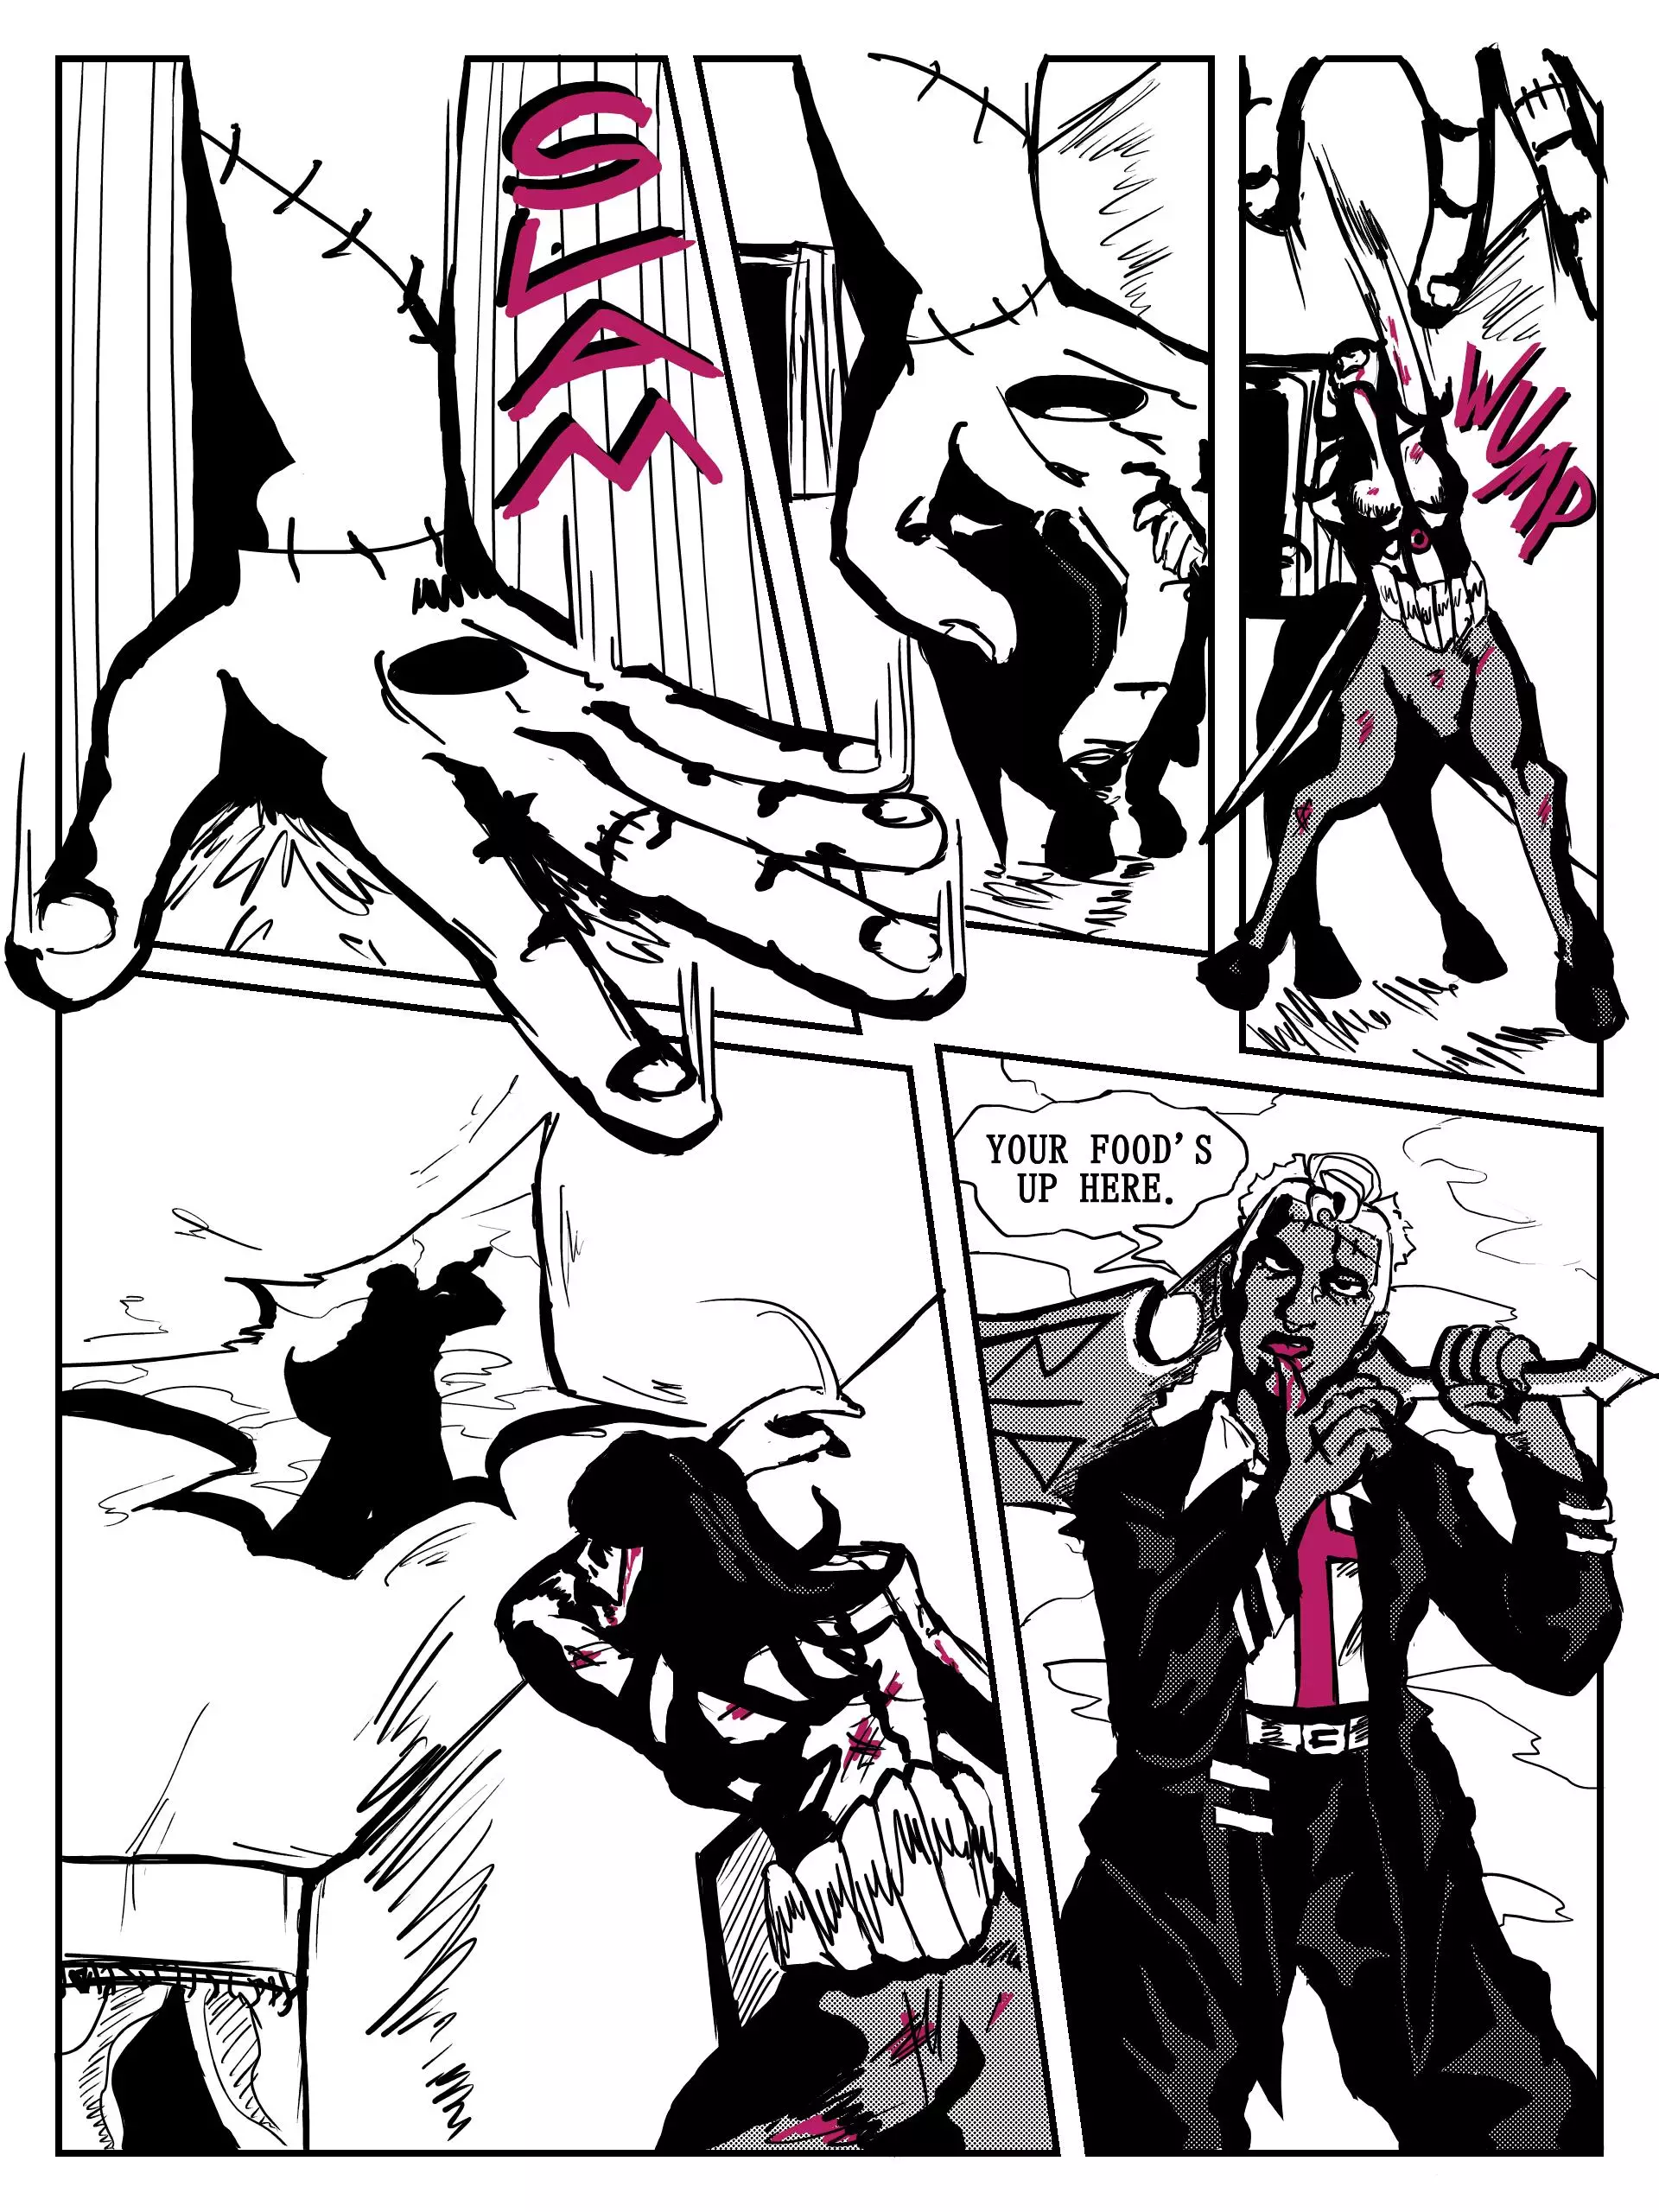 Don't Fear The Reaper - 9 page 9-753452a1